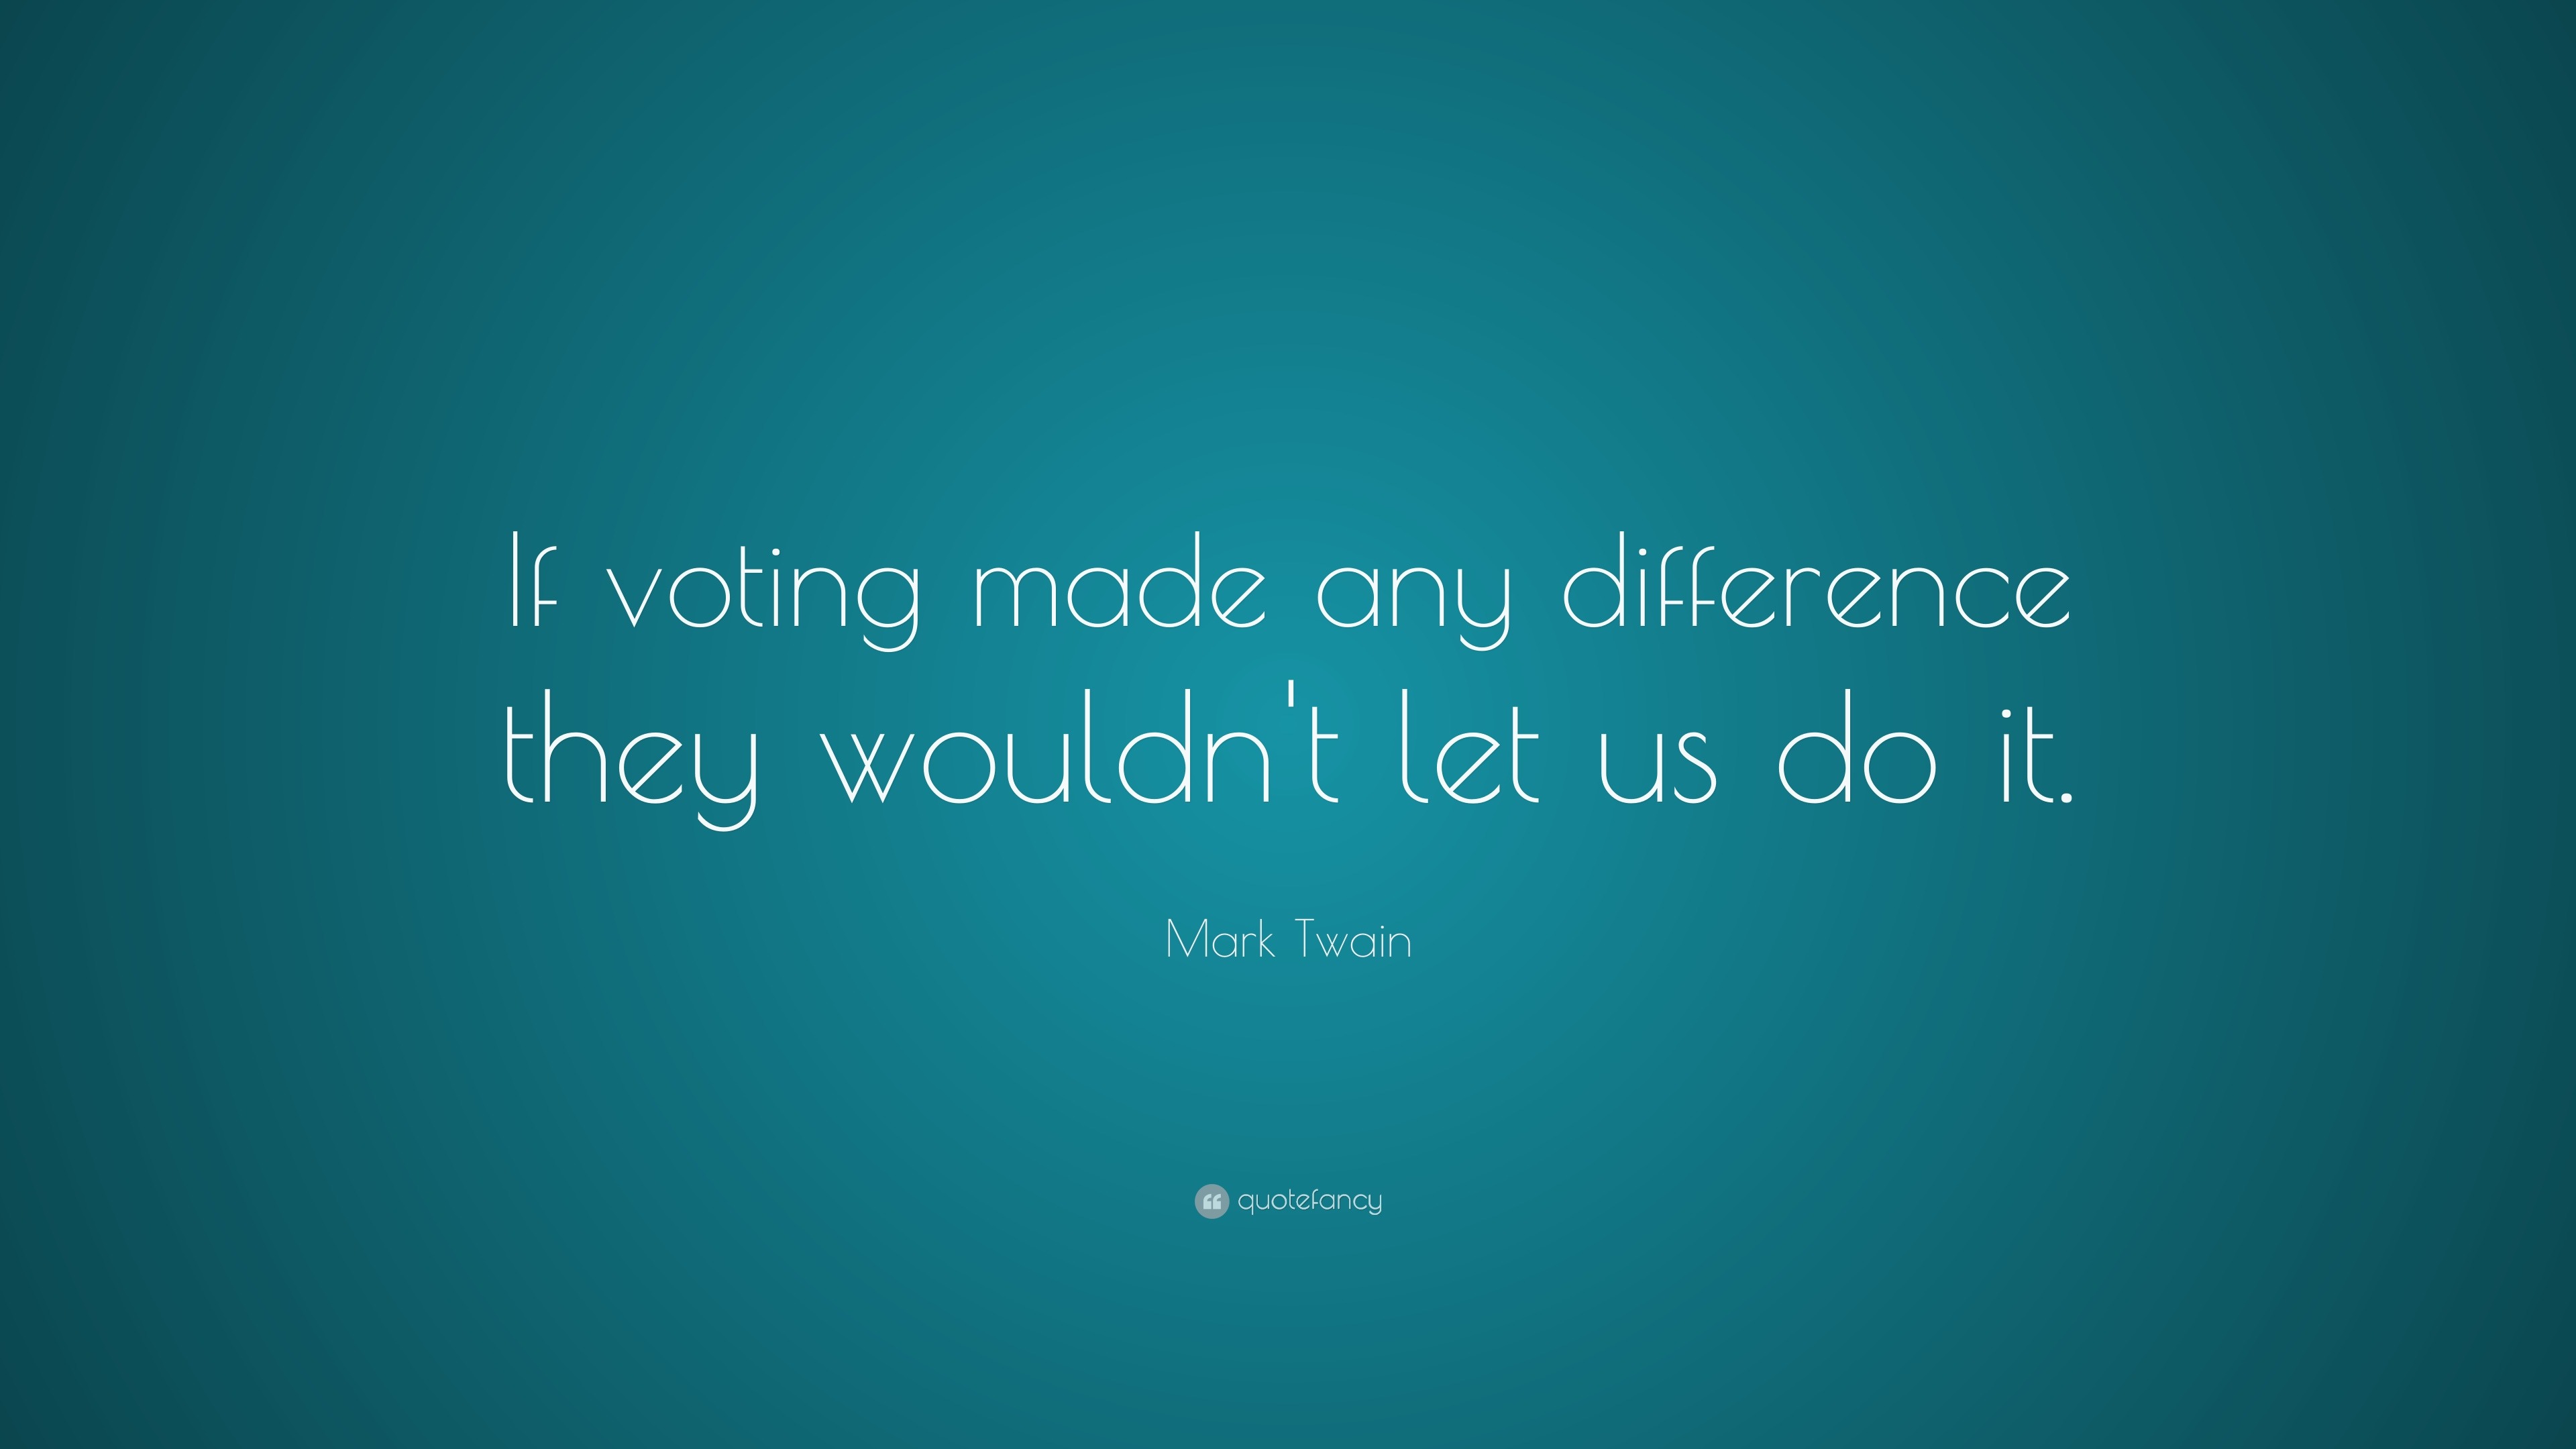 Mark Twain Quote: “If voting made any difference they wouldn’t let us do it ...3840 x 2160